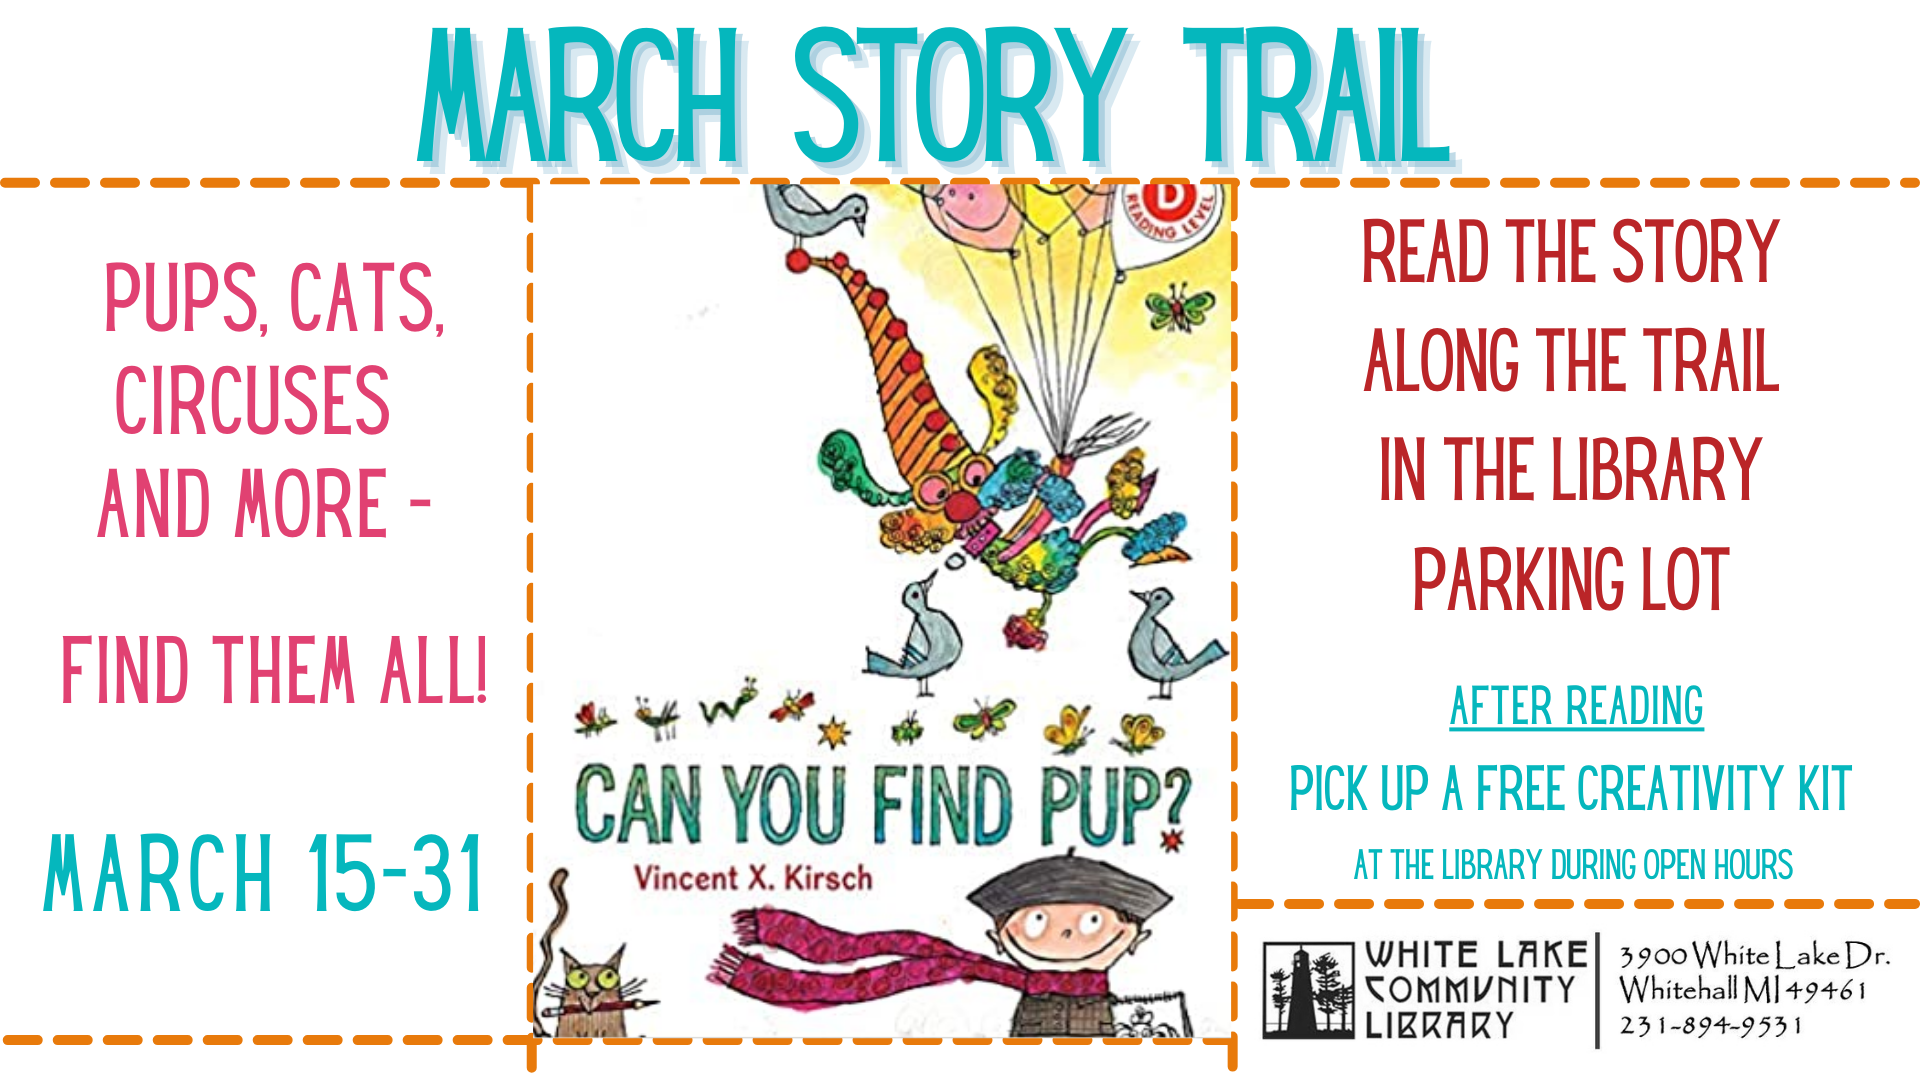 MARCH STORY TRAIL 21